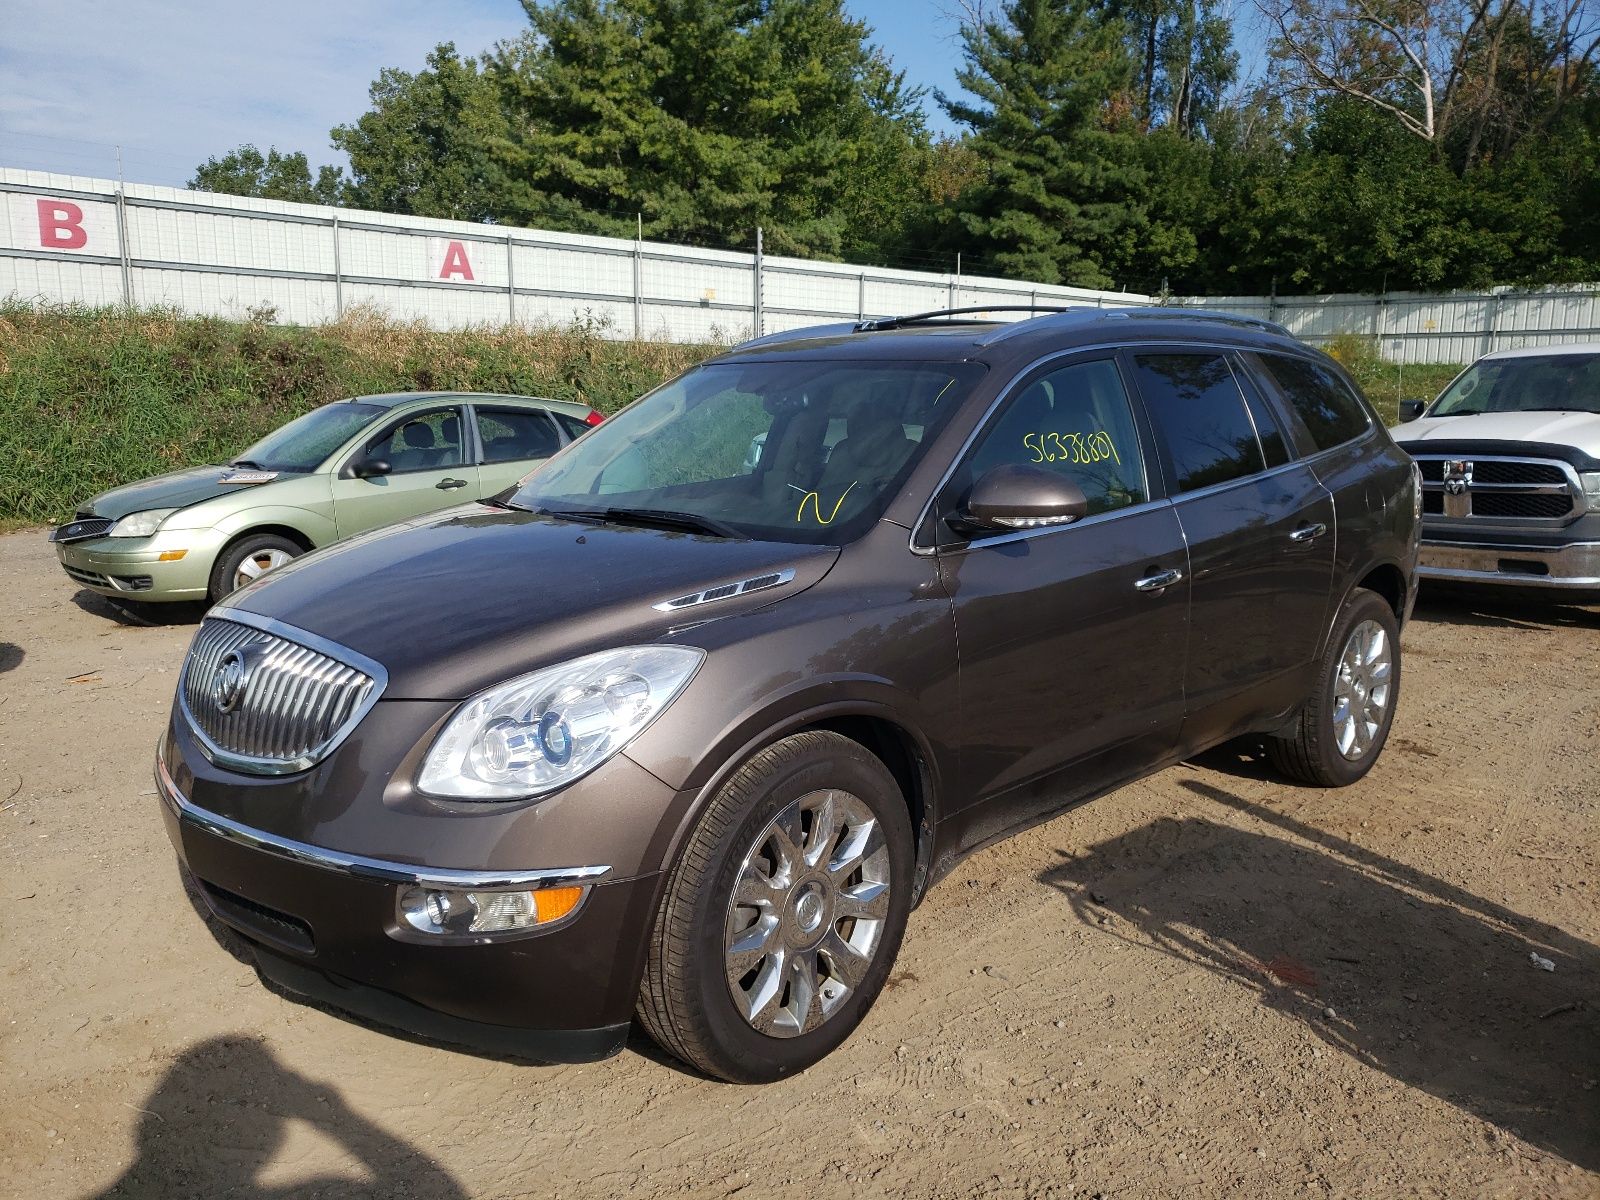 5GAKVDED8CJ137961 Buick Enclave 2012